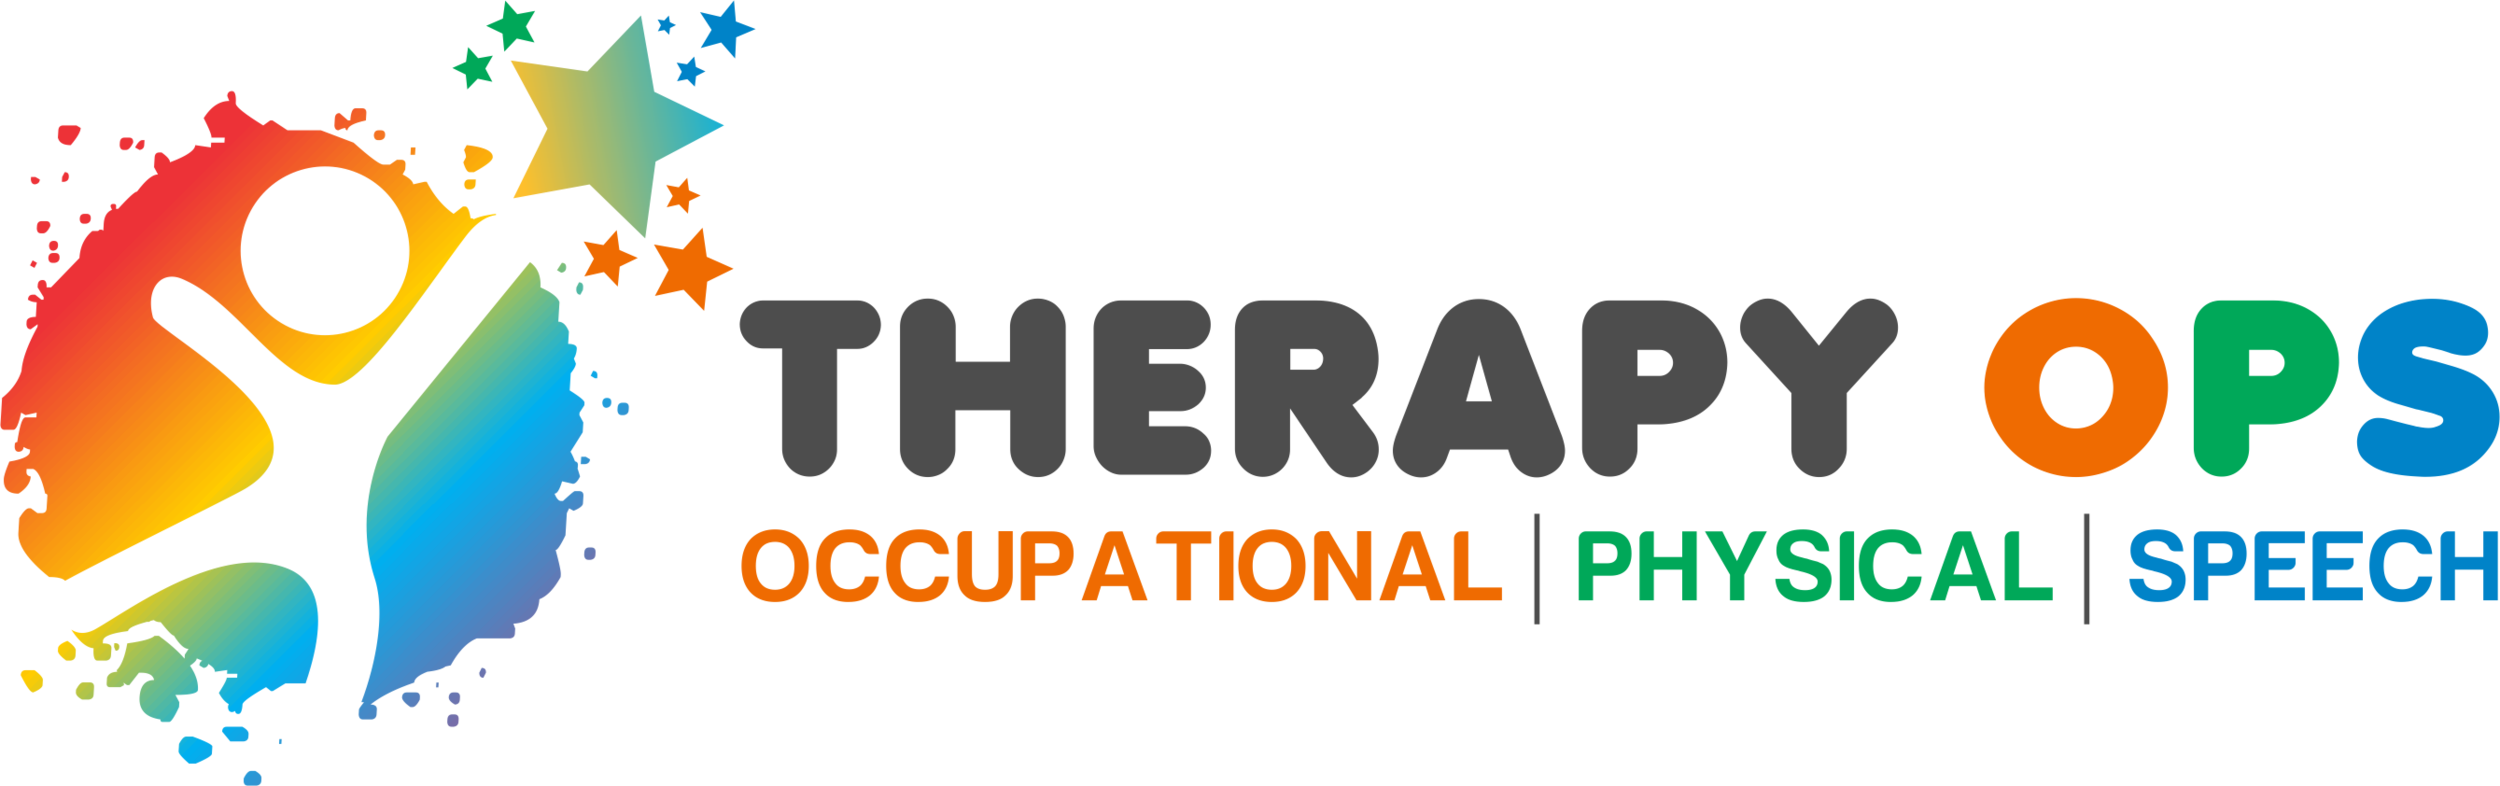 occupational therapy resources therapy ops